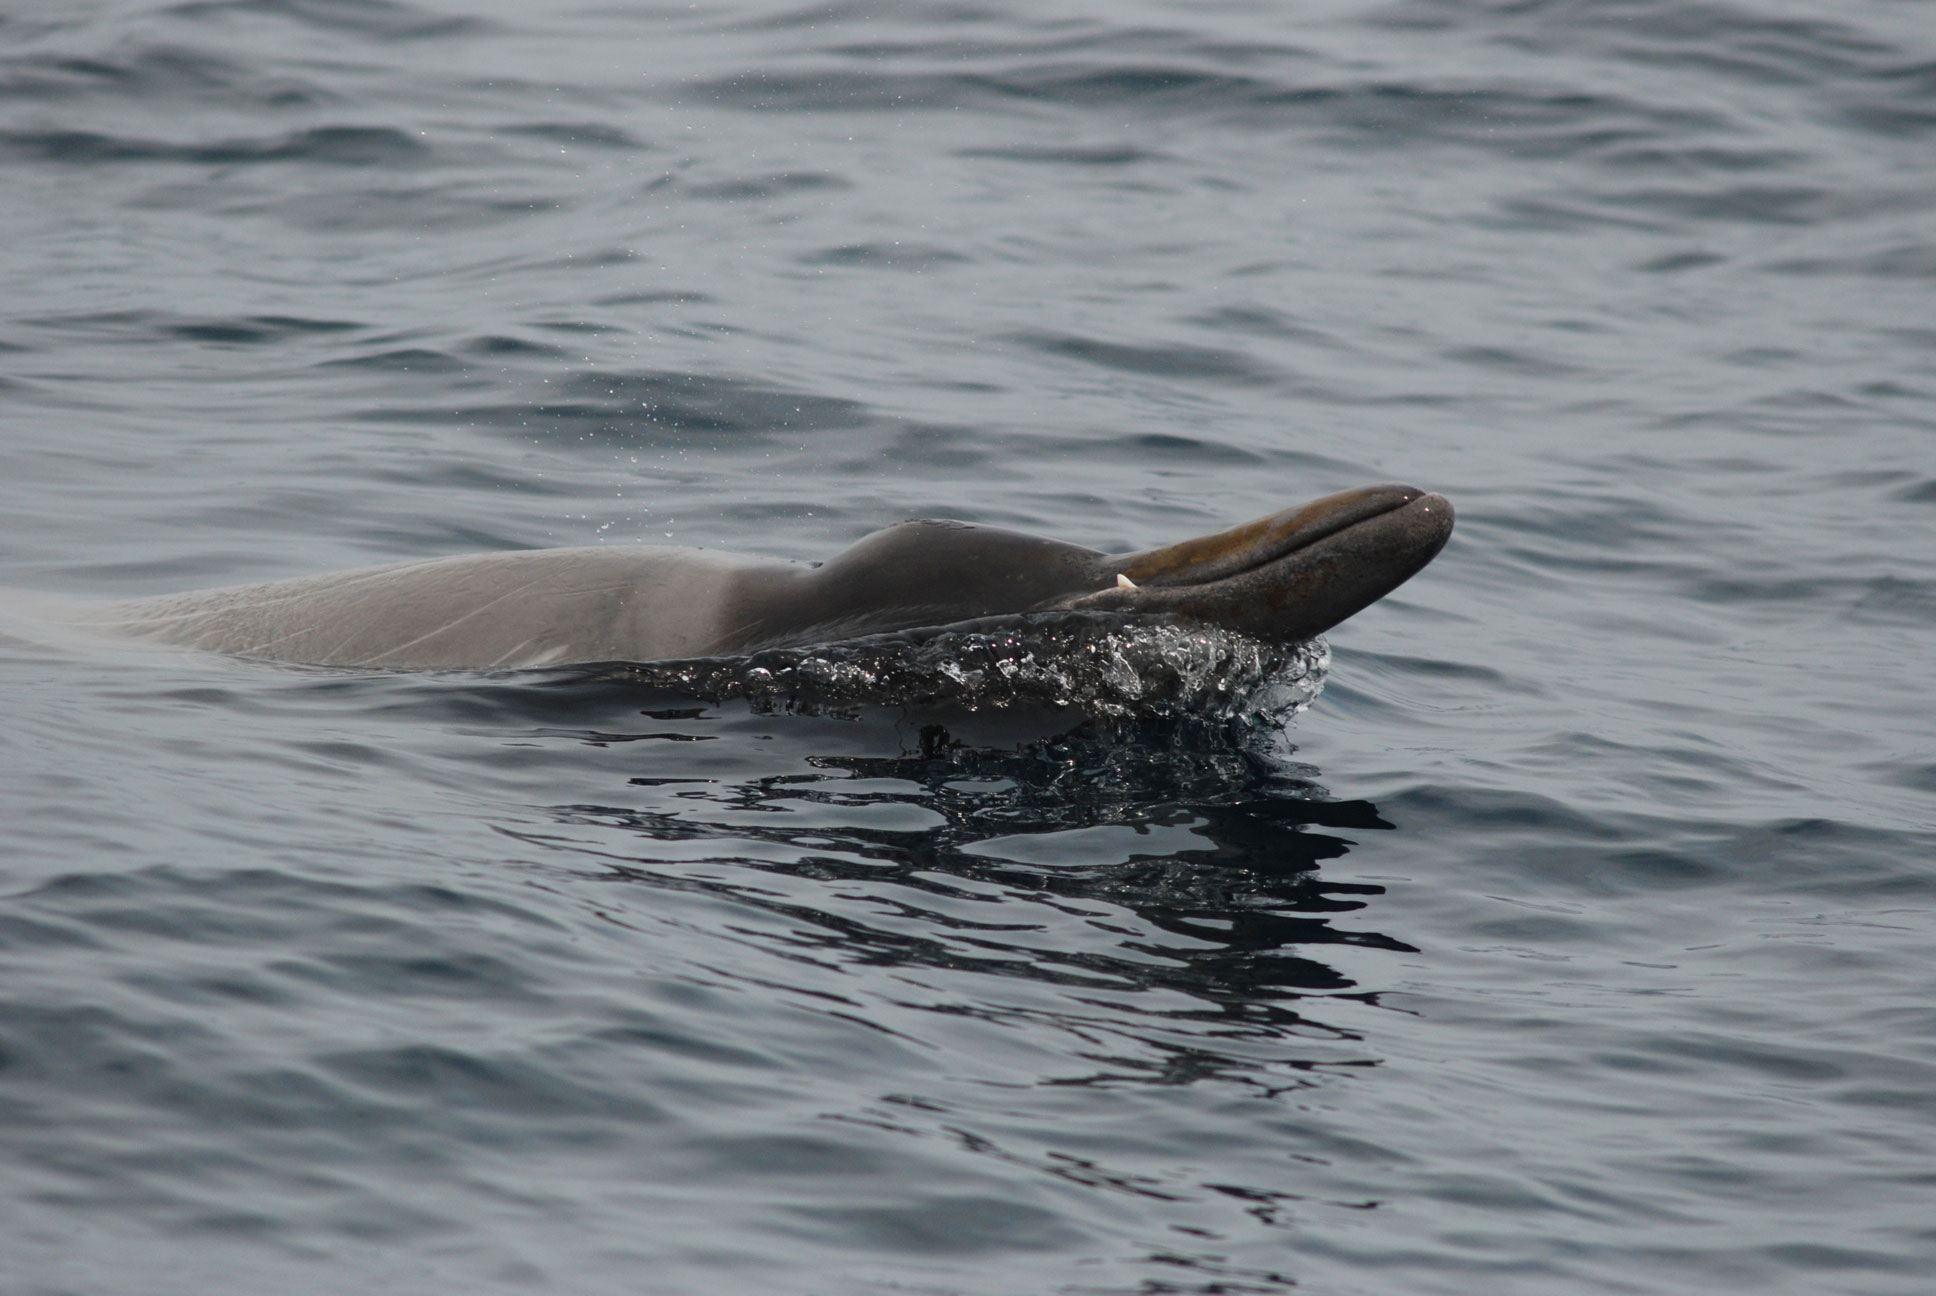 Sowerby’s beaked whale at the surface.